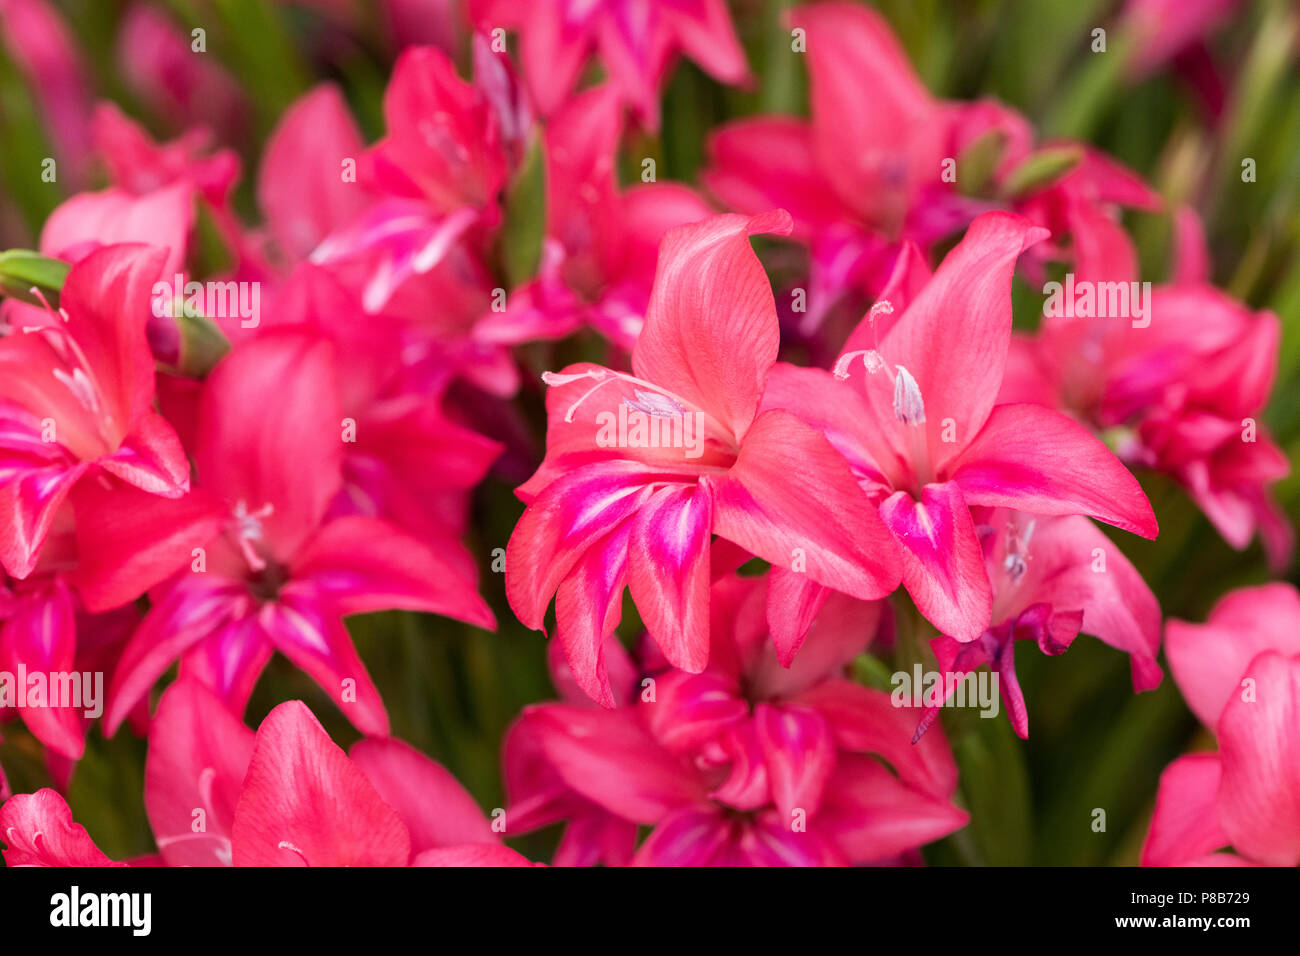 Gladiolus.Gladiolus 'Robinetta' flowers on a floral display at a flower show. UK. Stock Photo